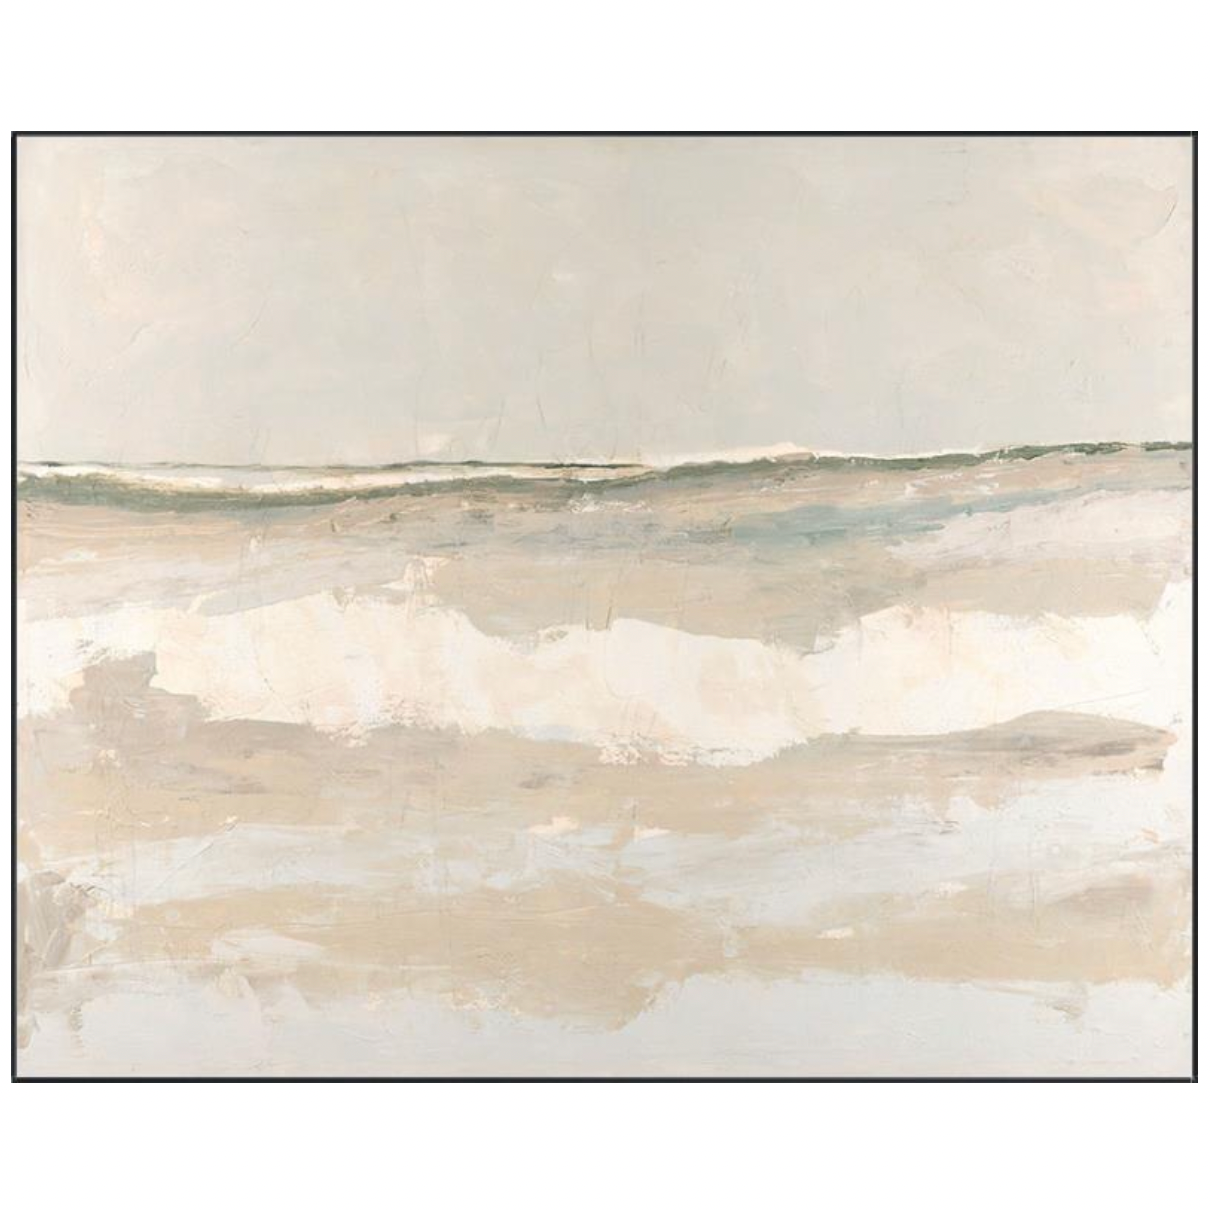 Painted on linen, the Navarre Morning on Linen Art is a soft, muted dream. Hang above your console table or behind the sofa to create a peaceful, coastal feel.   Product Type: Linen Art Finish: Linen with Hand Embilishment Size: 50 x 40 without frame